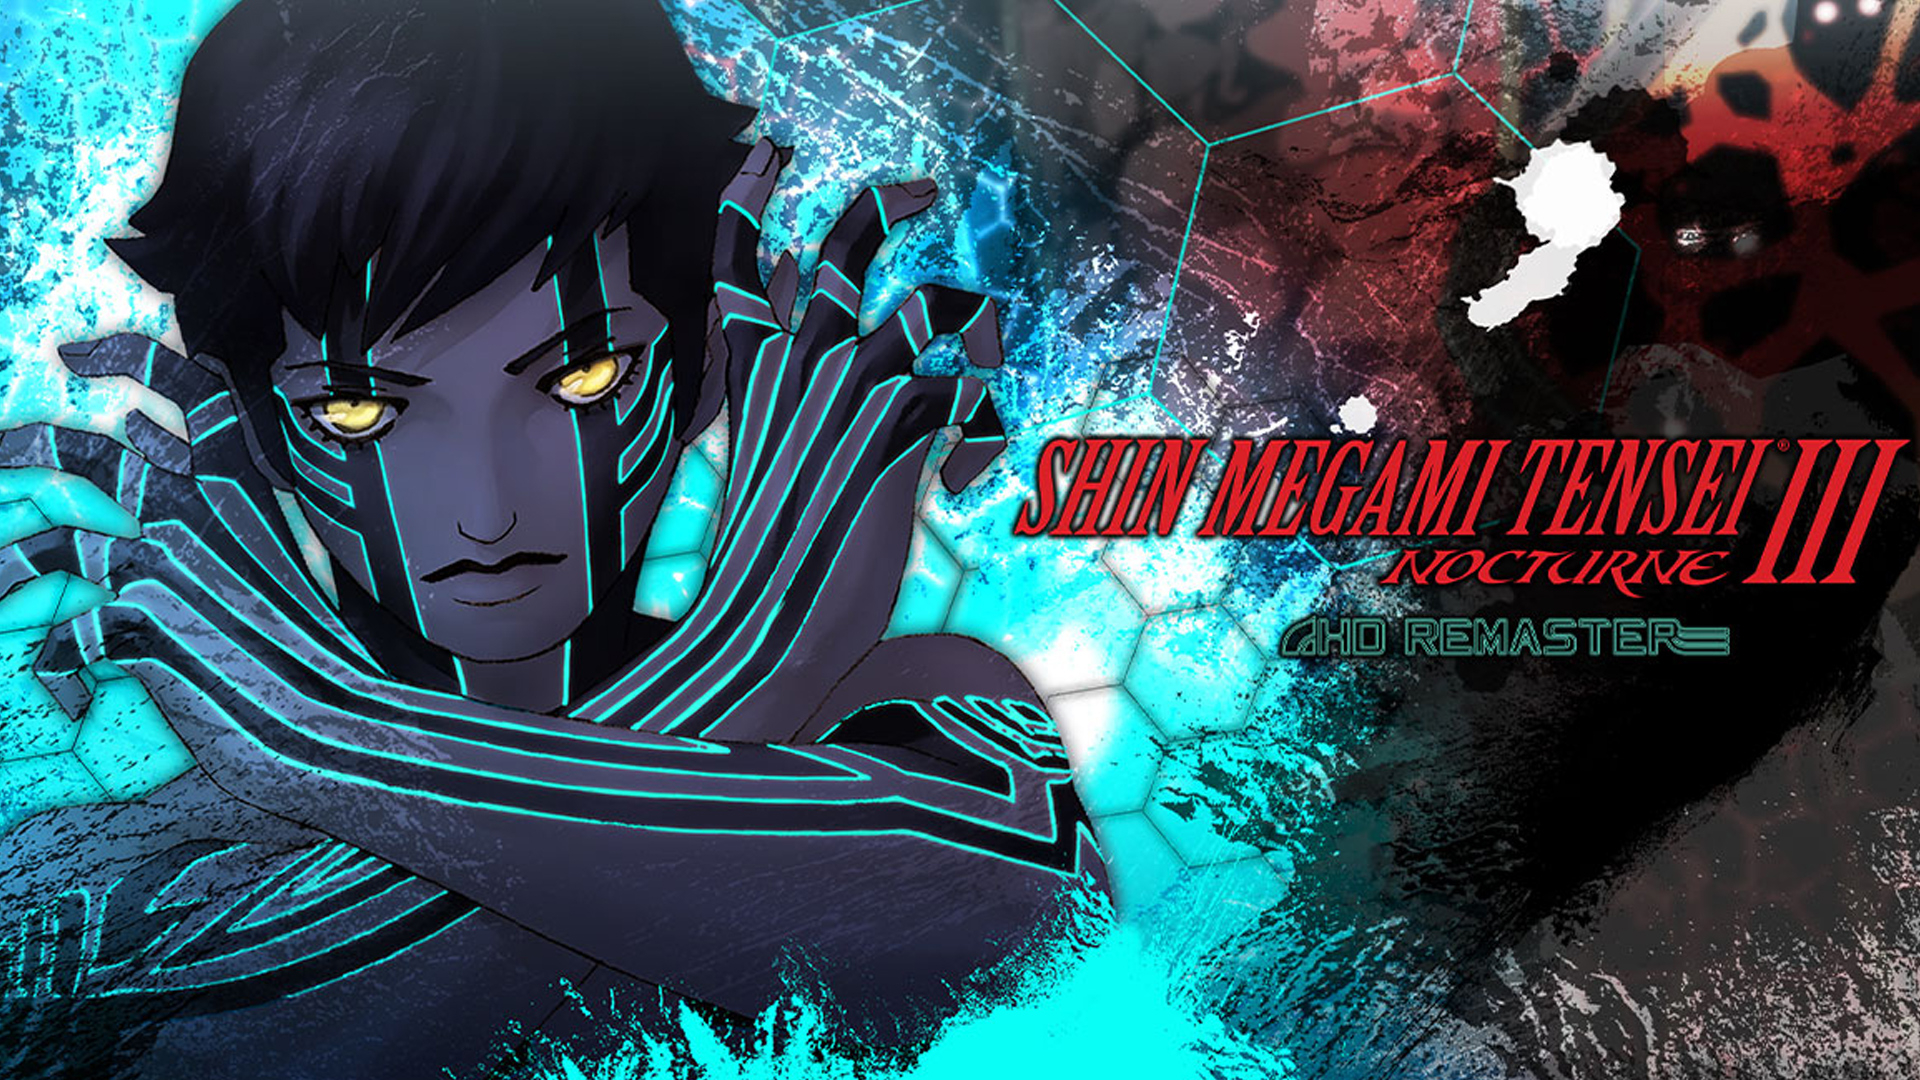 1920x1080 Shin Megami Tensei III Nocturne HD Remaster Beginners Tips and Tricks for Combat, Levelling Up, Boss Fights, Exploration, Demon Fusion, and More &acirc;&#128;&cent; The Mako Reactor